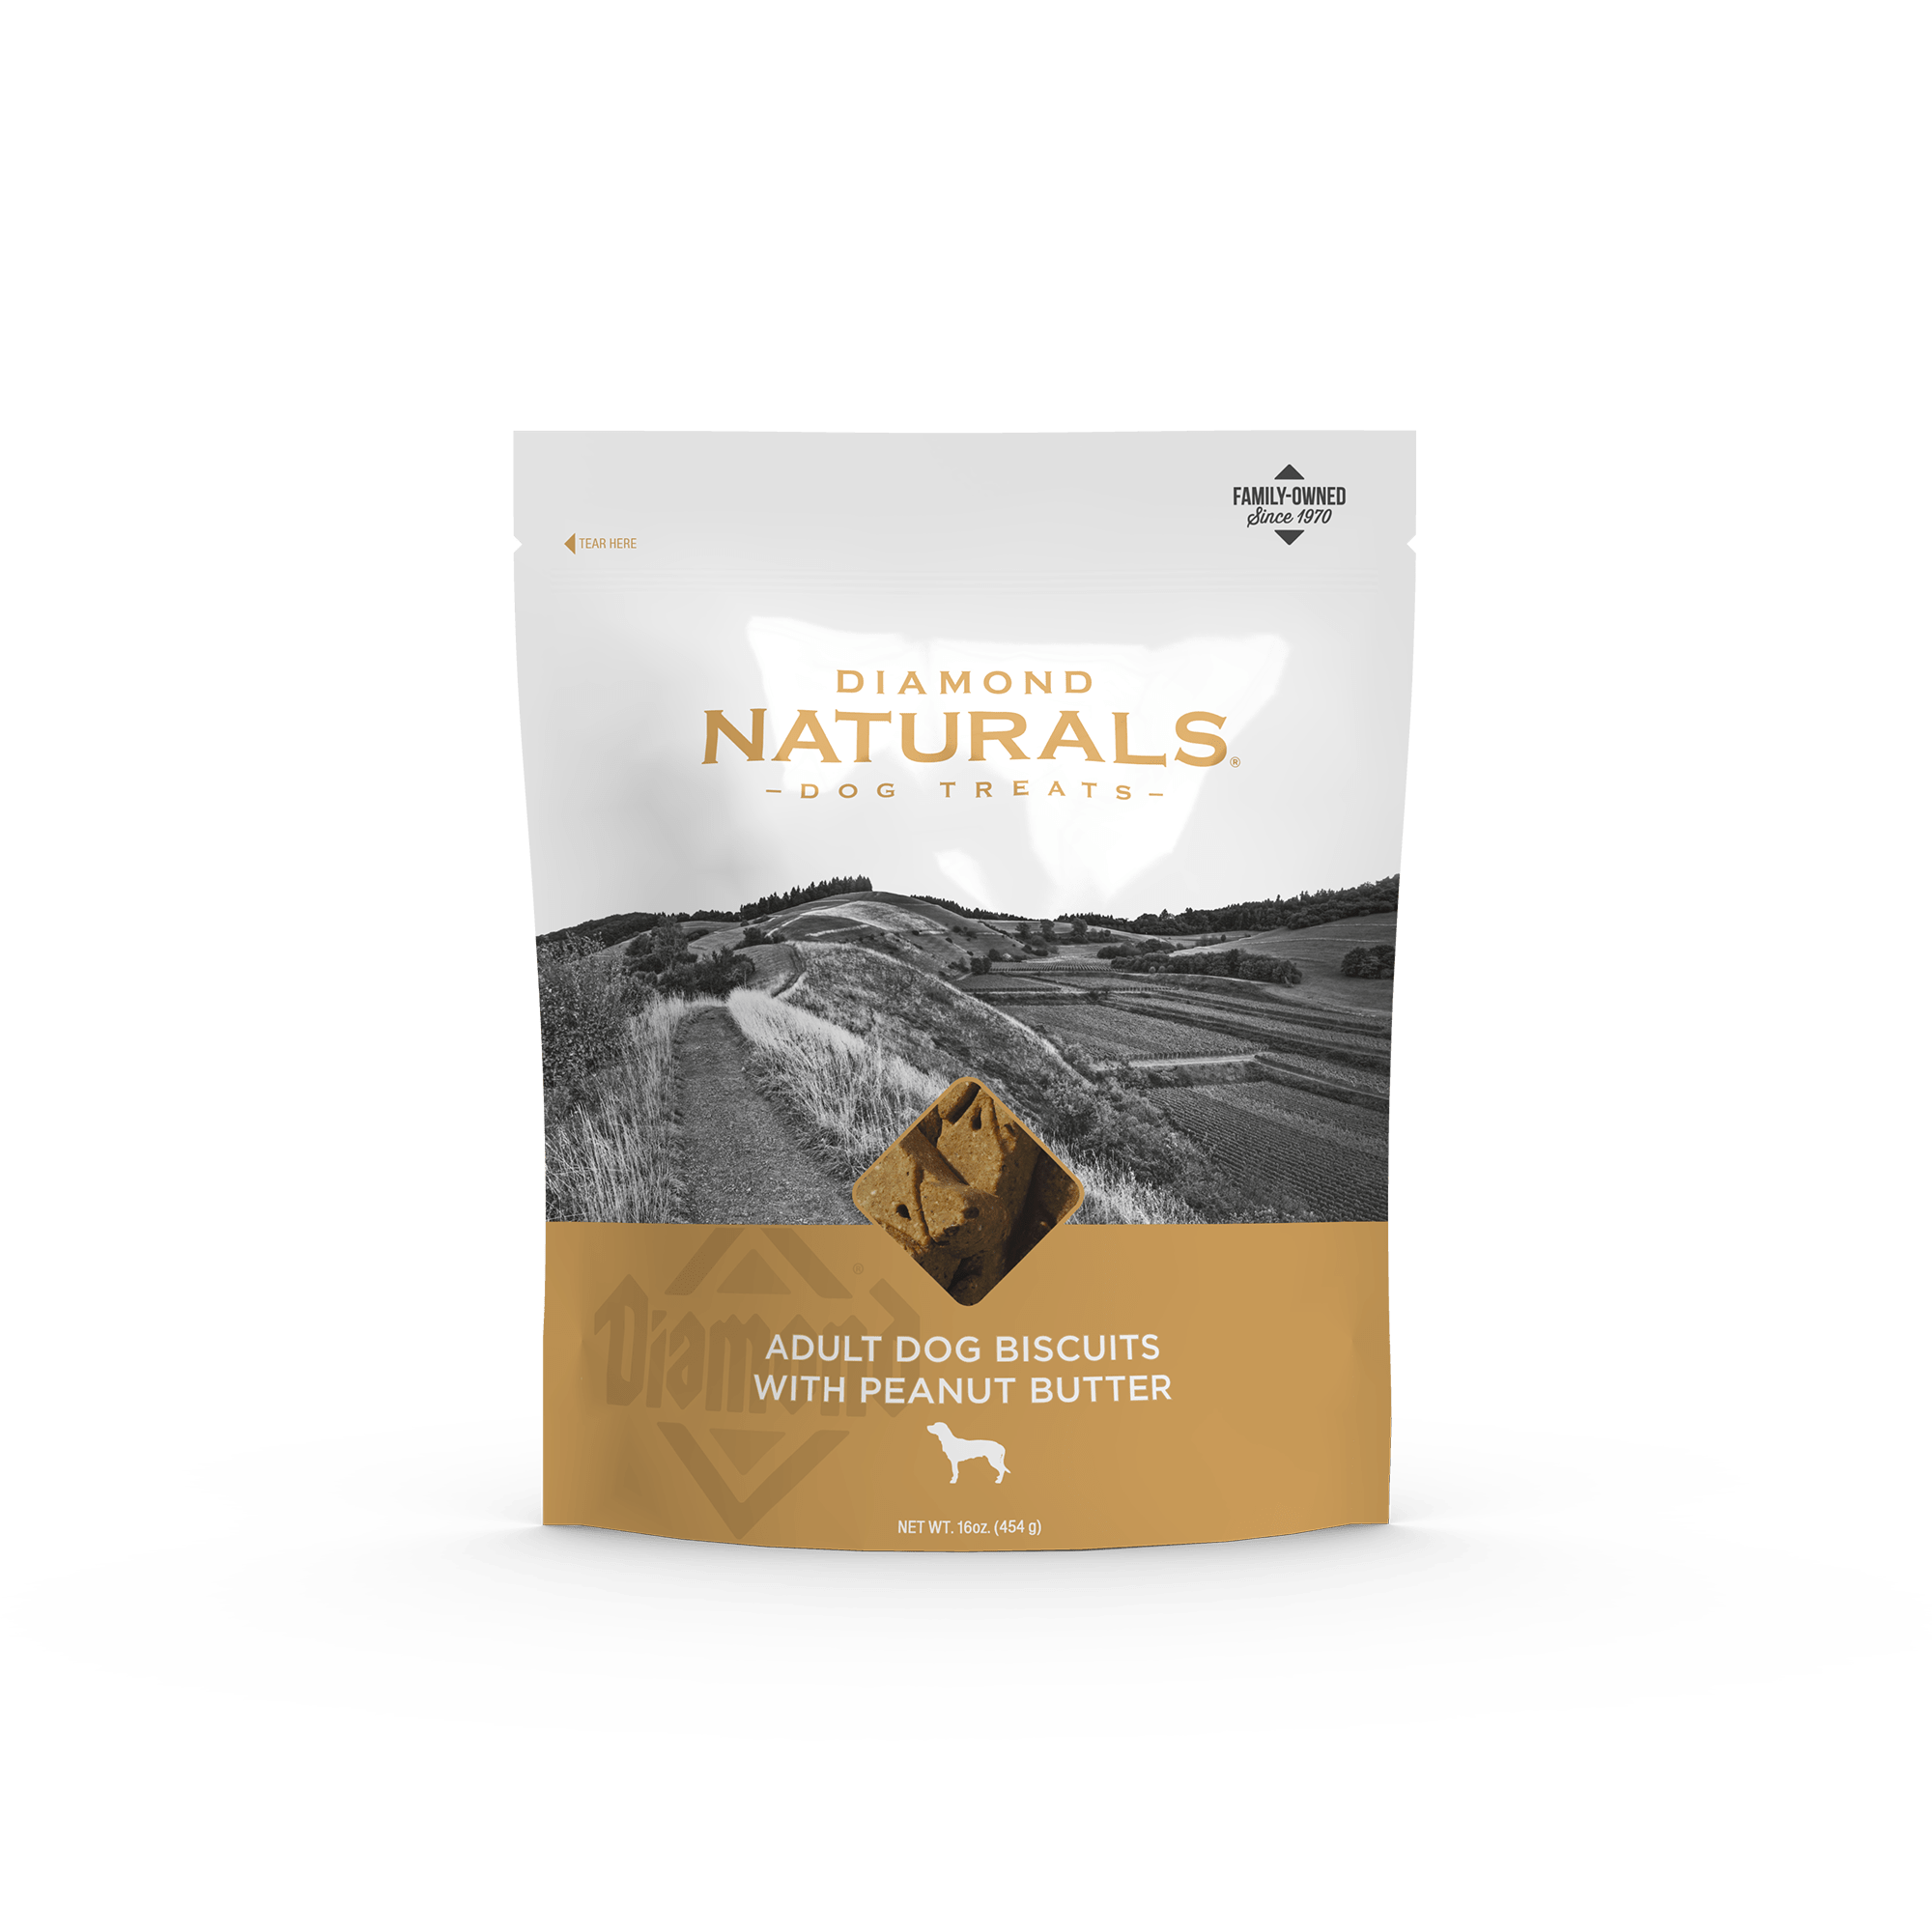 Diamond Naturals Adult Dog Biscuits with Peanut Butter product packaging